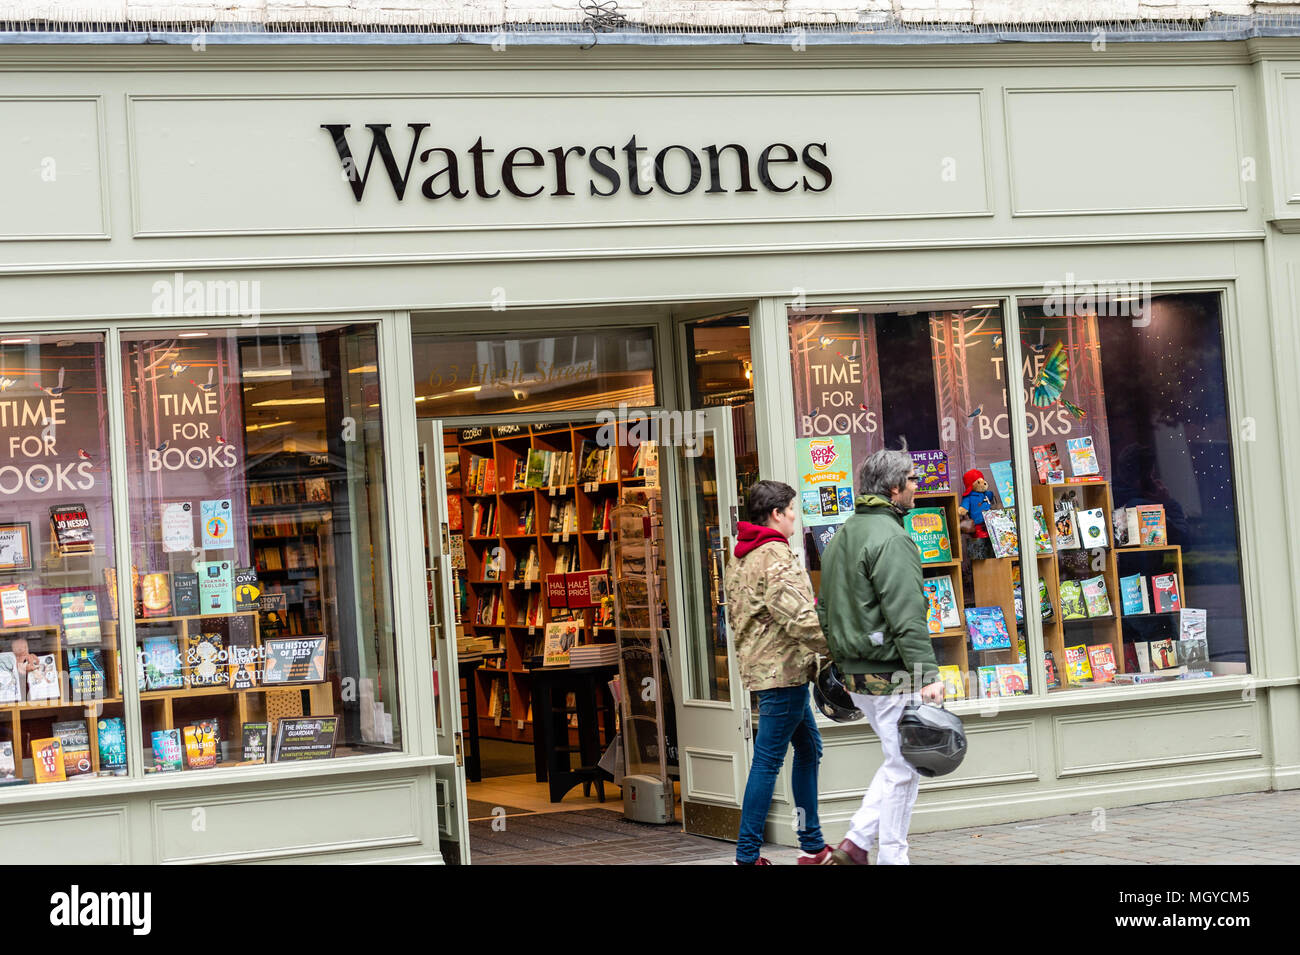 Waterstones book store frontage and signage in Brentwood Essex Stock Photo